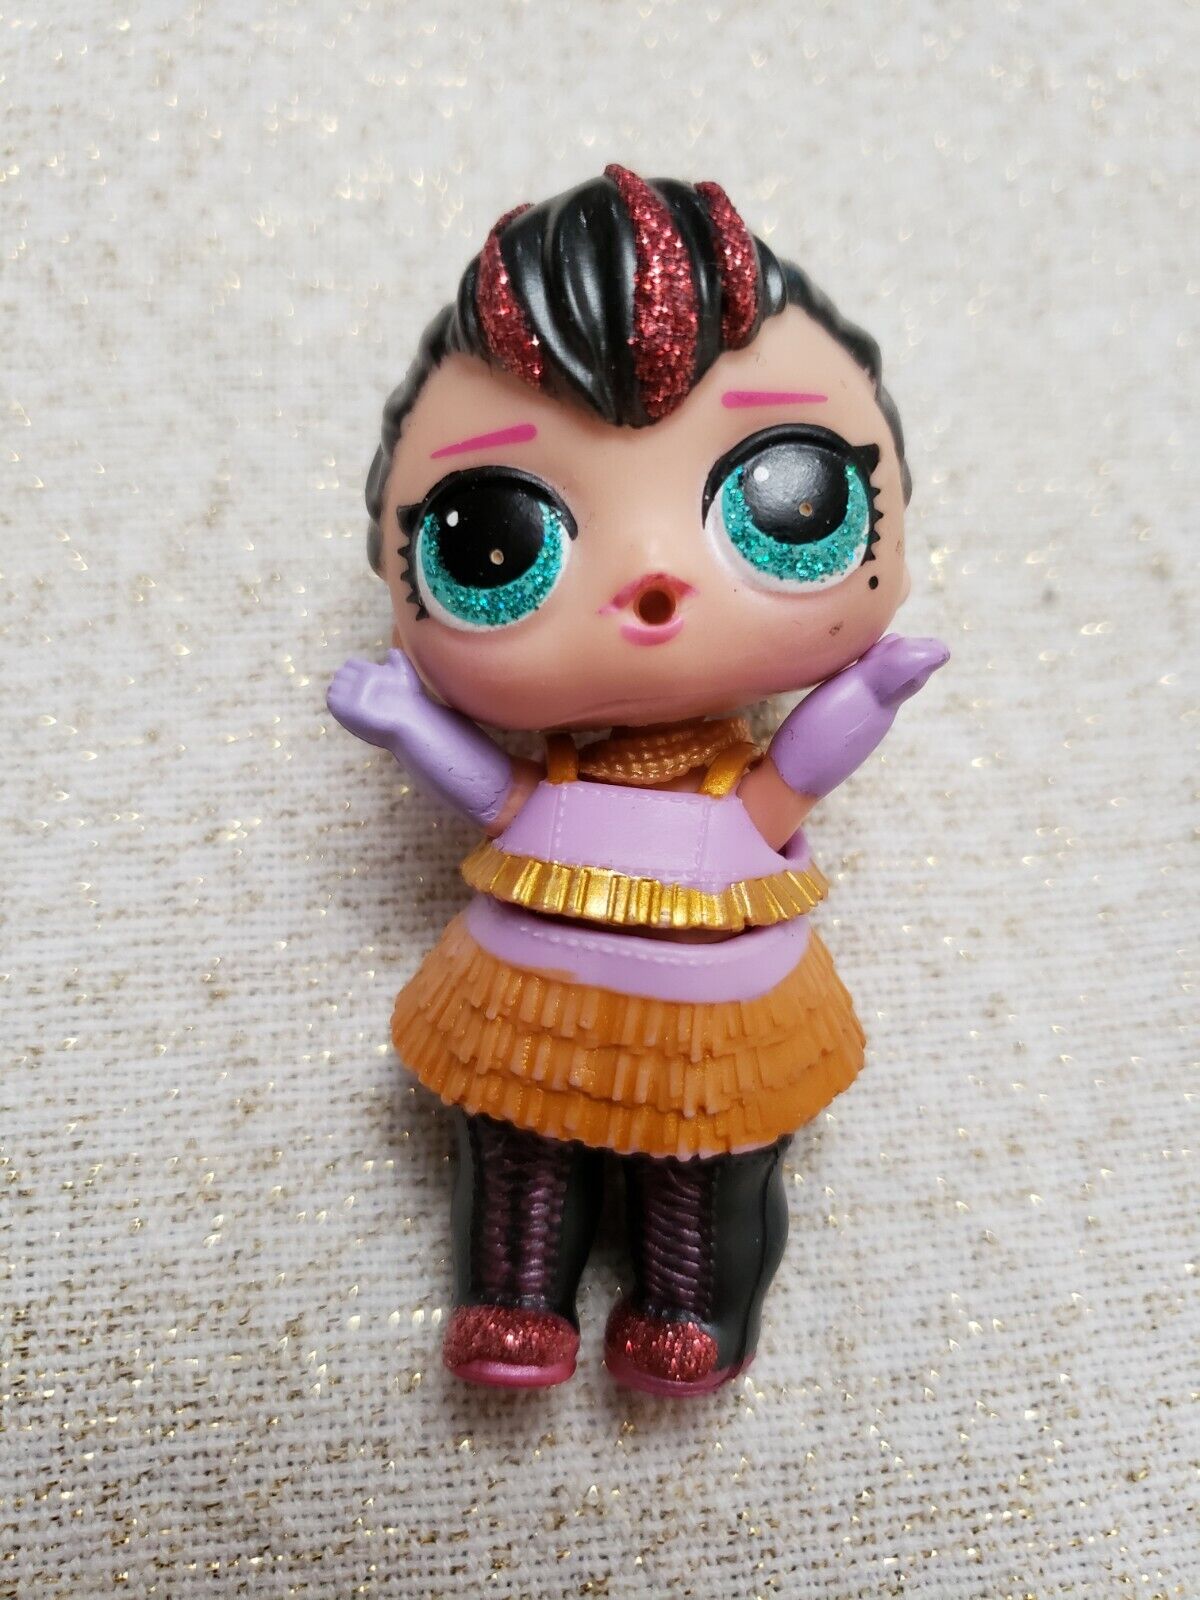 LOL Surprise Doll with Black Hair Pink Highlights 💗 | eBay